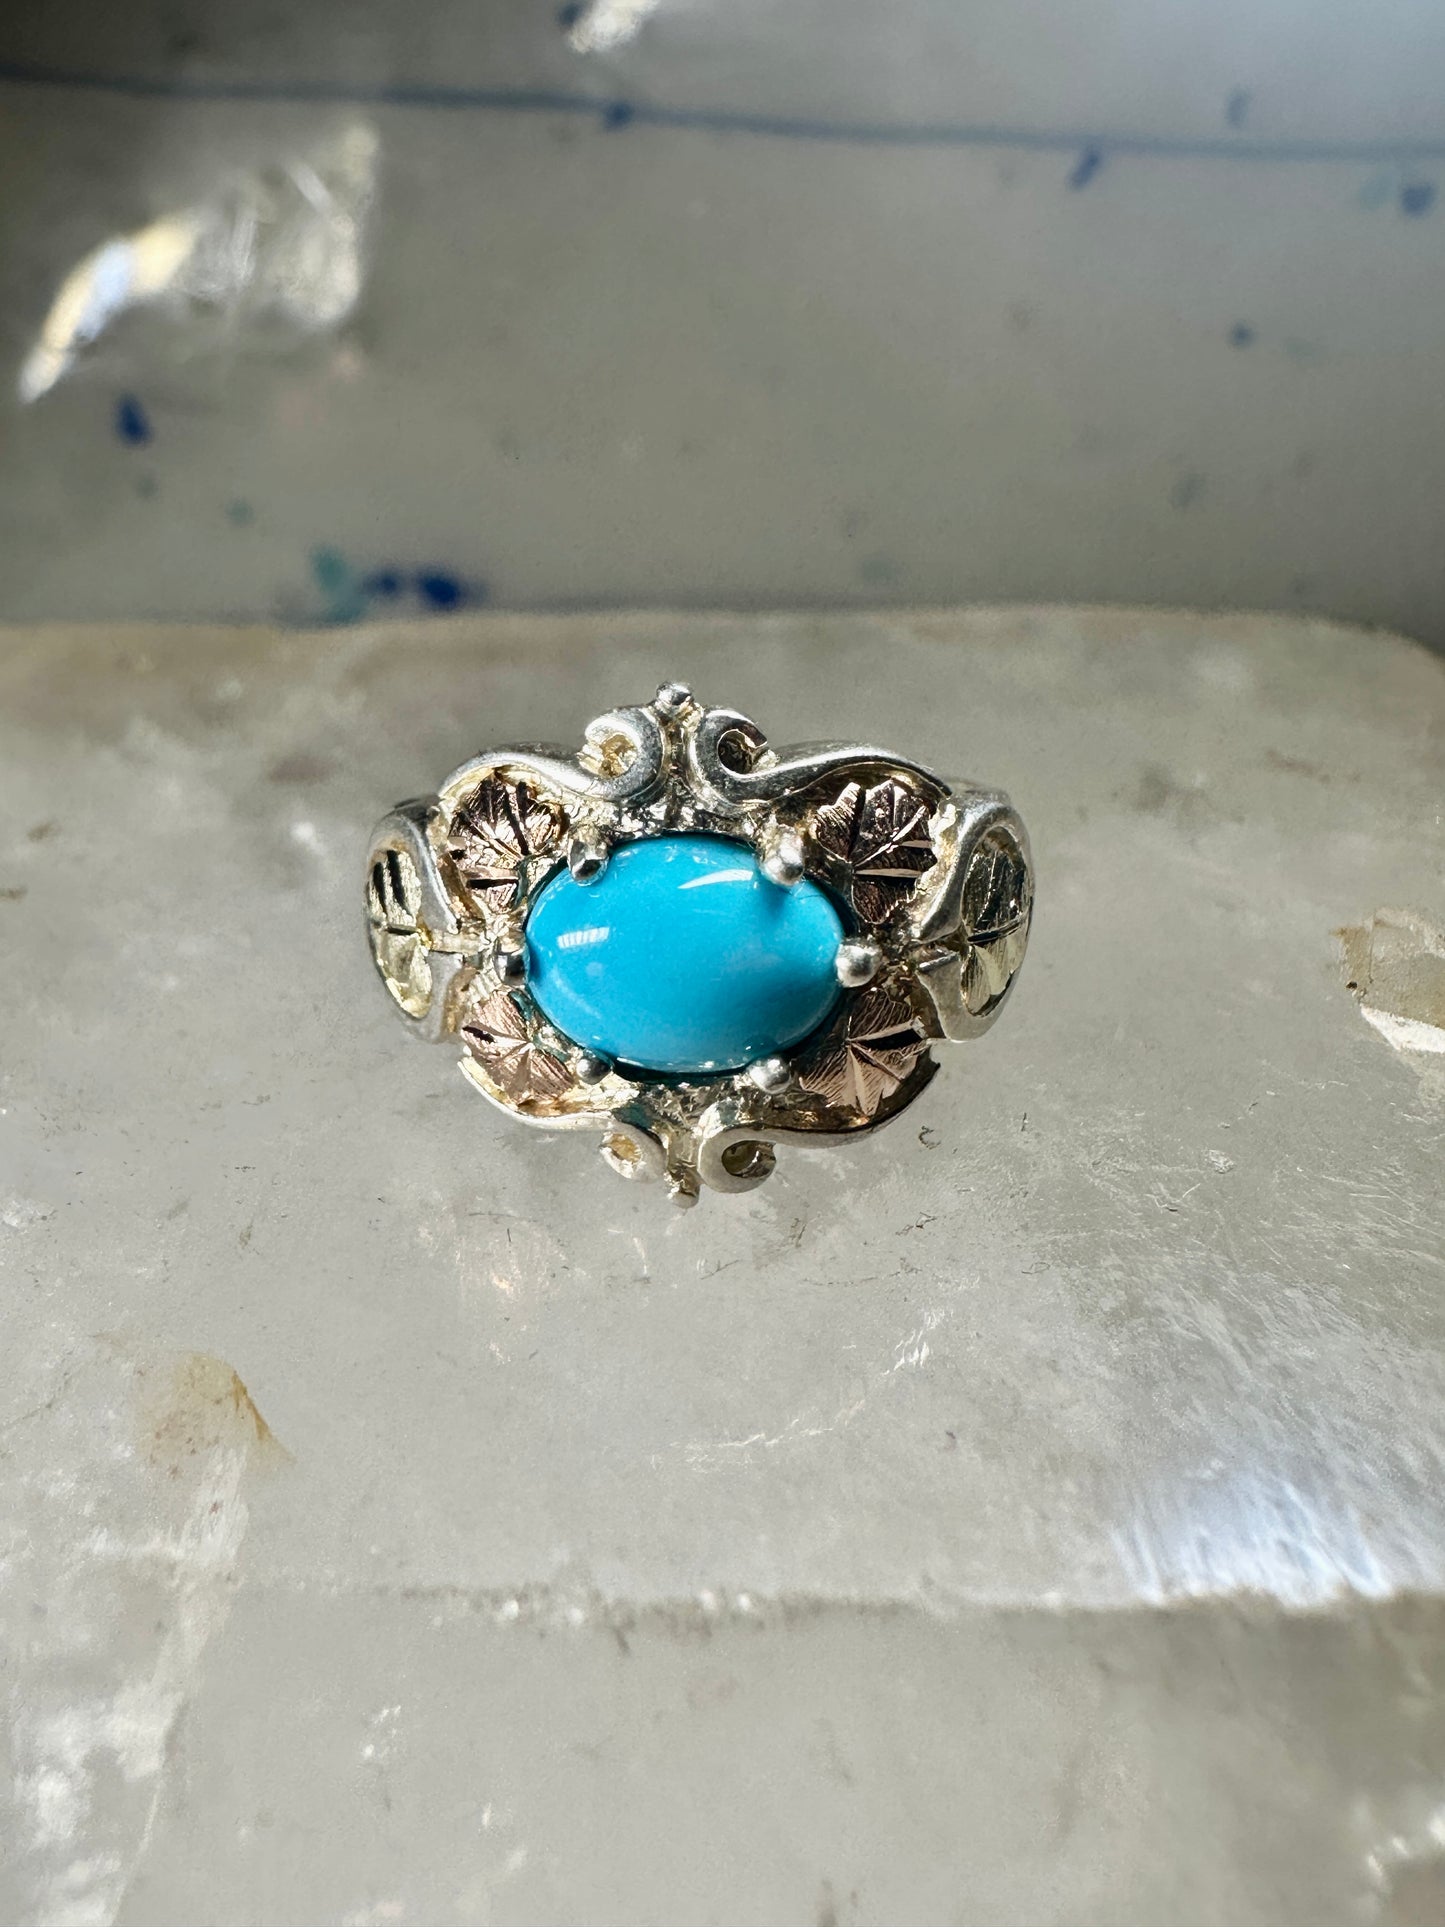 Black Hills Gold ring turquoise floral leaves band size 5.25 sterling silver women